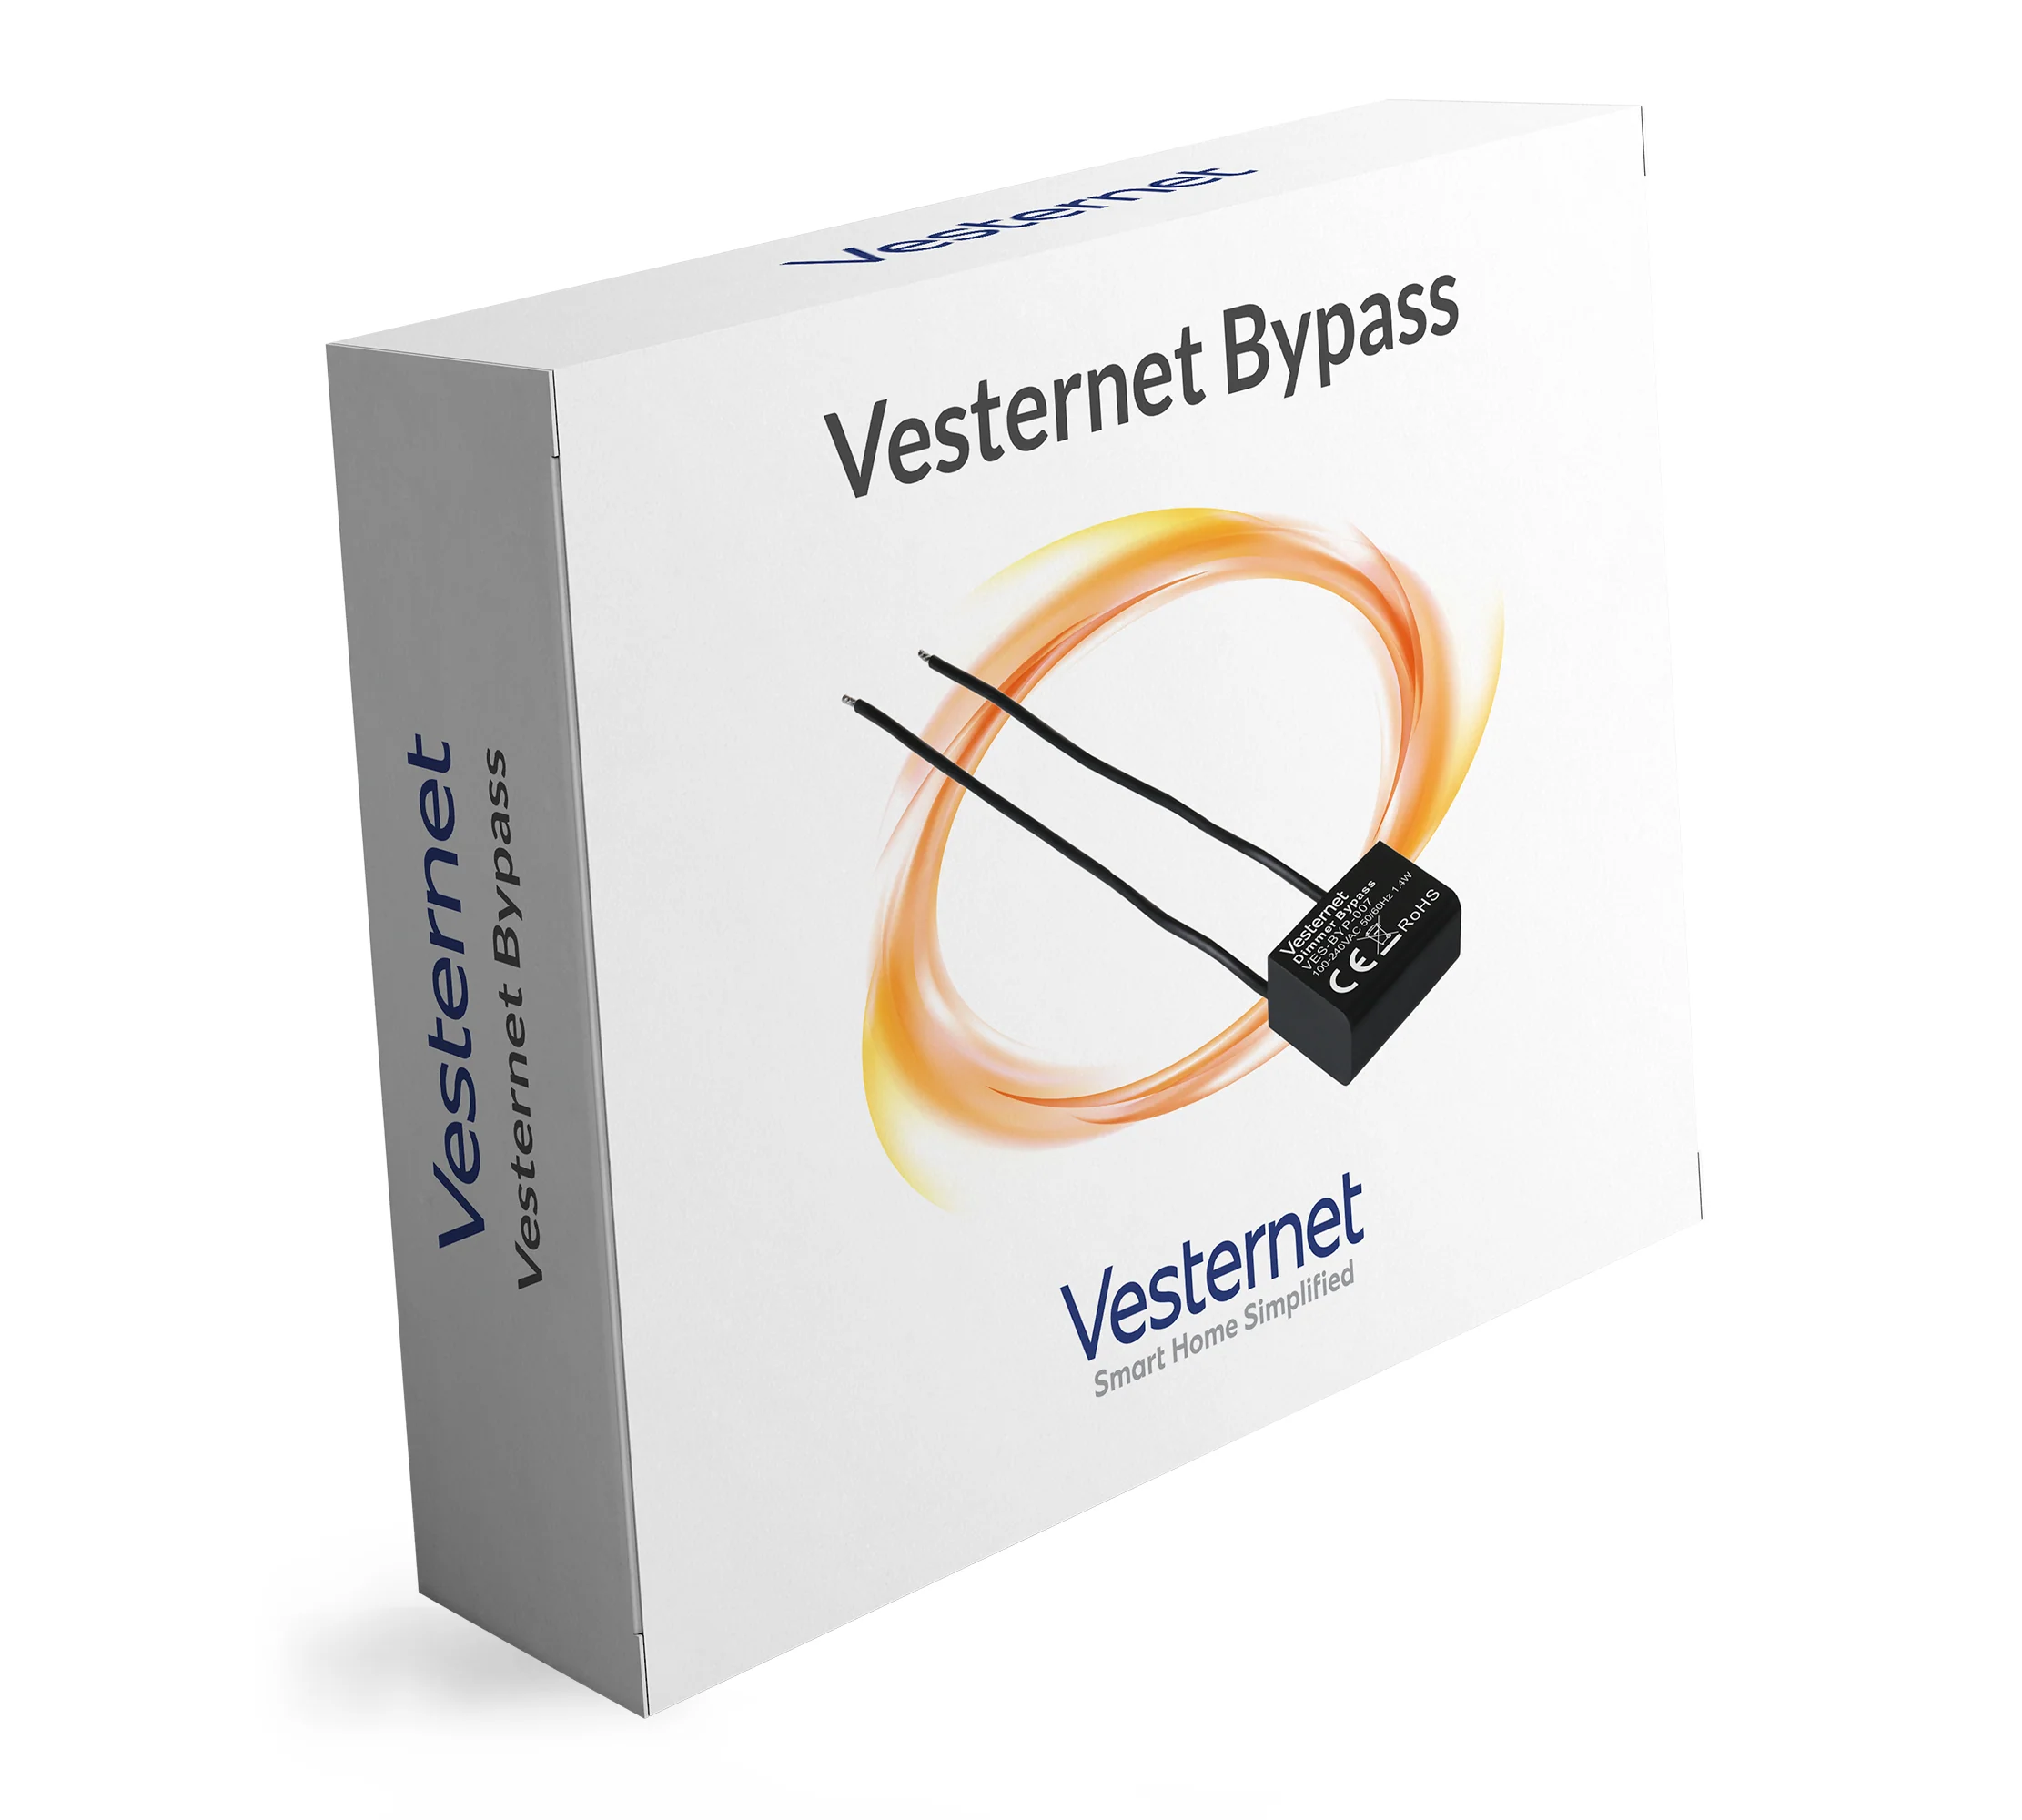 Vesternet Bypass Questions & Answers